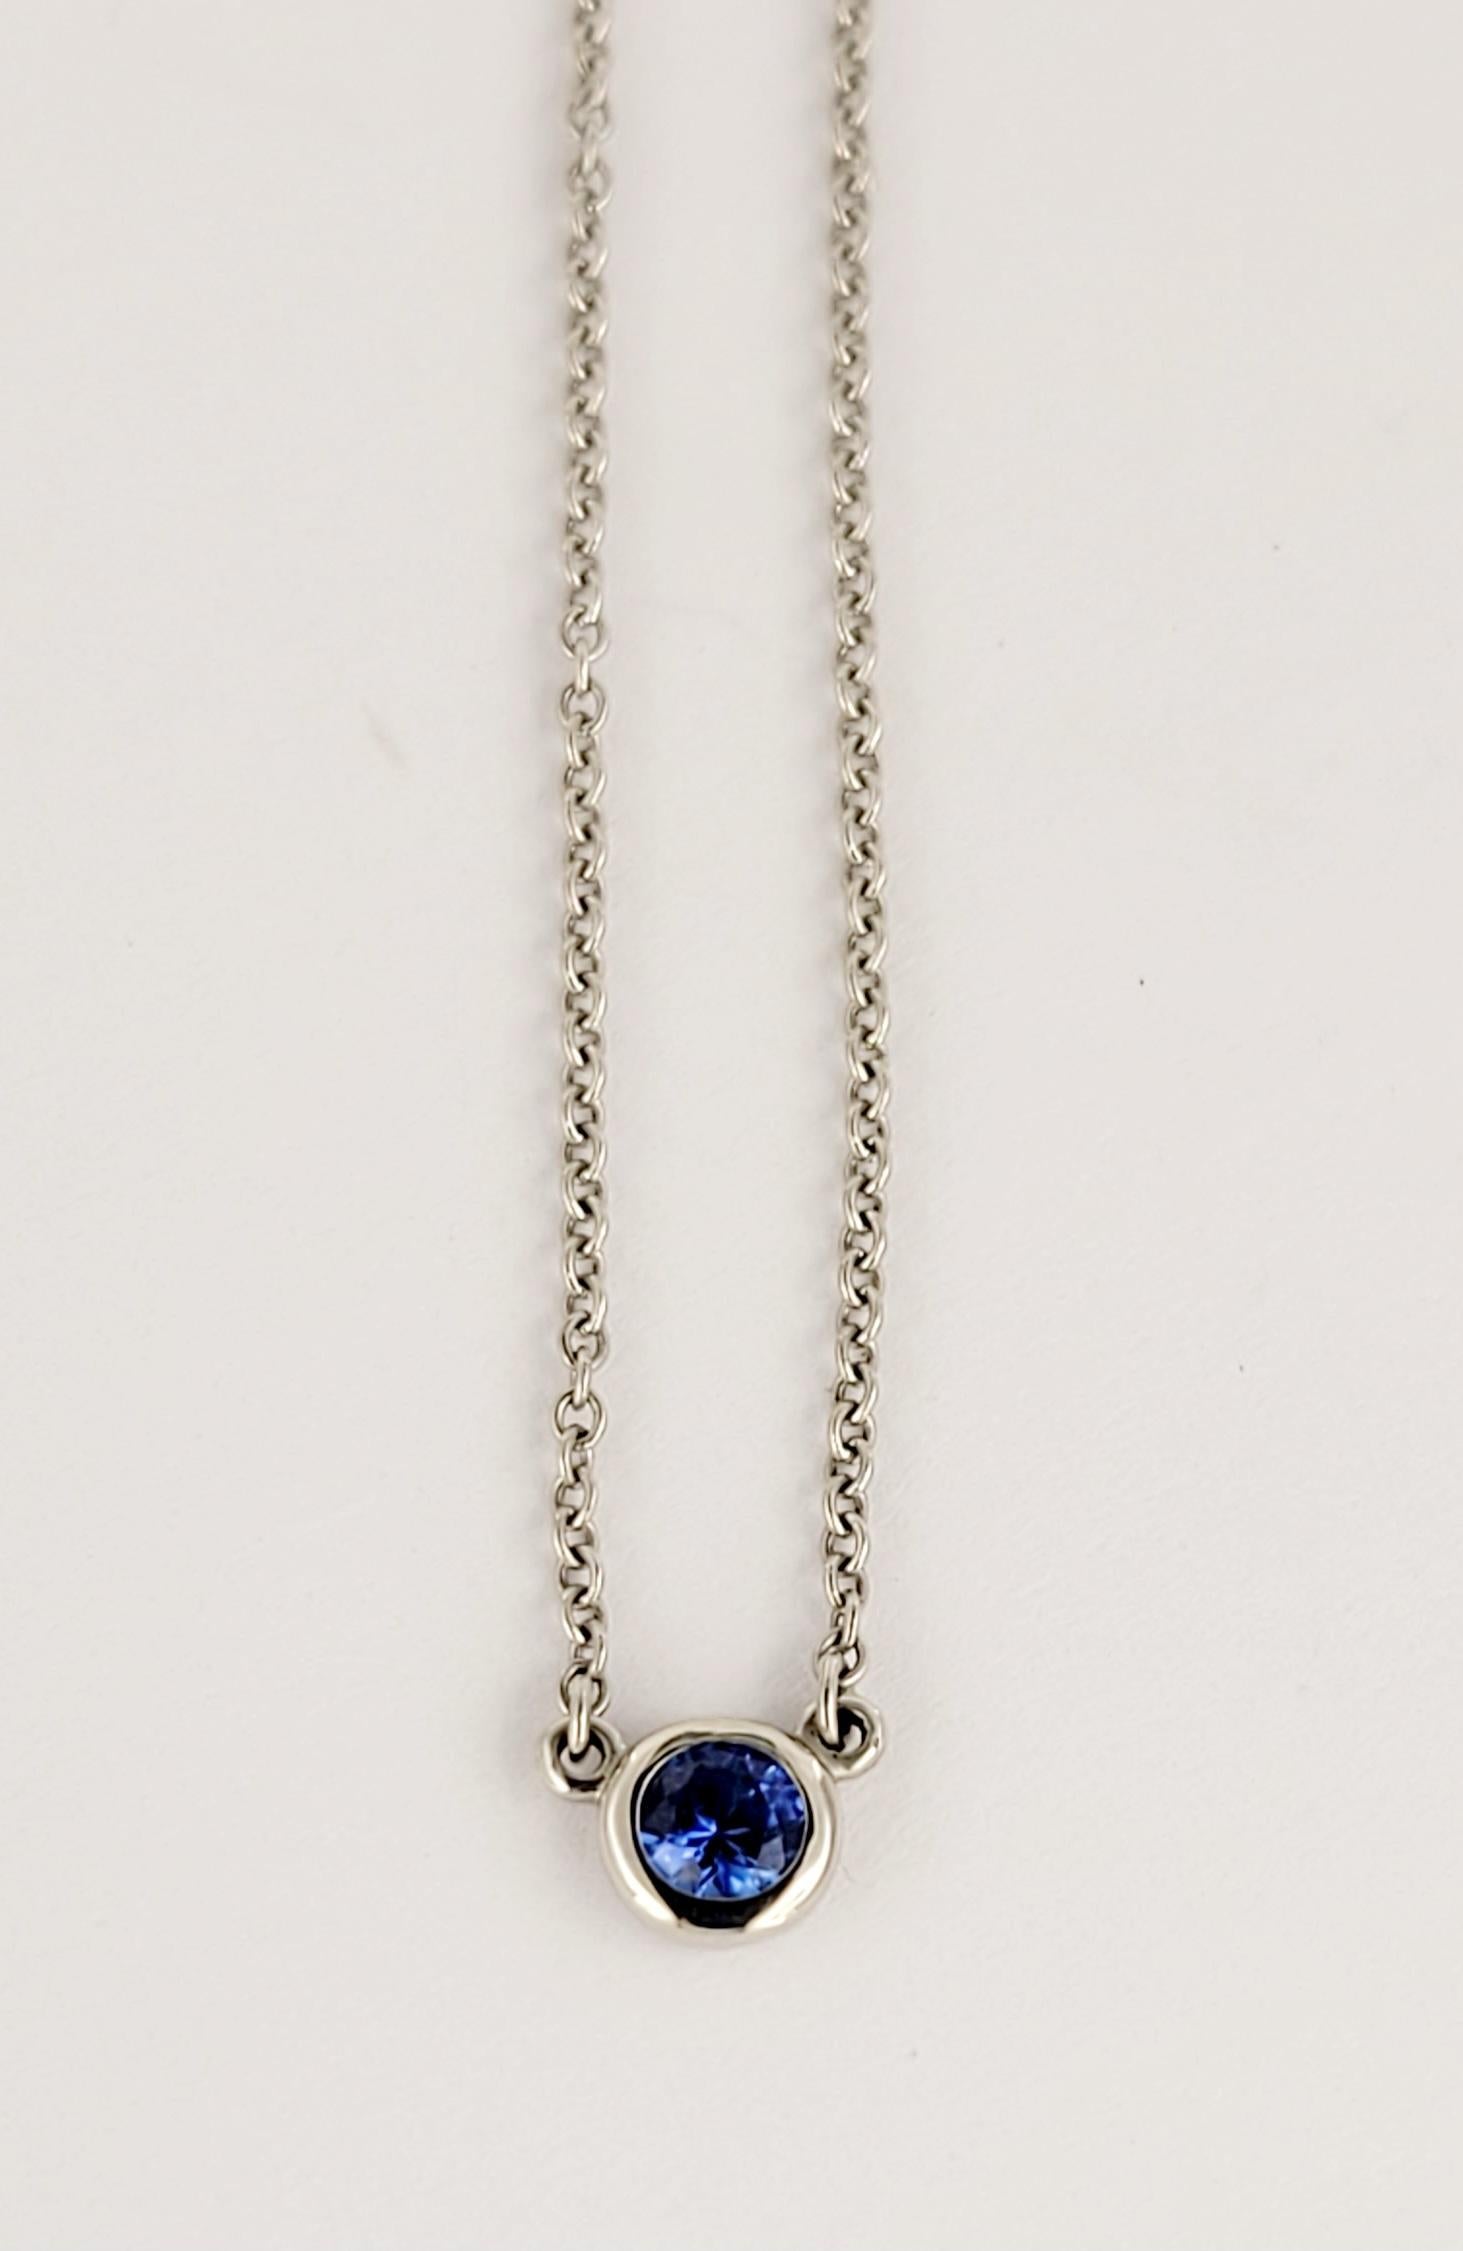 Brand Elsa Peretti for Tiffany& Co
Platinum with a Sapphire 
Chain Length 16'' Long
Sapphire .23ctw
Weight 2.6gr
Mint Condition, Like New
Comes with Tiffany& Co Pendant Box 
Retail Price $2.300